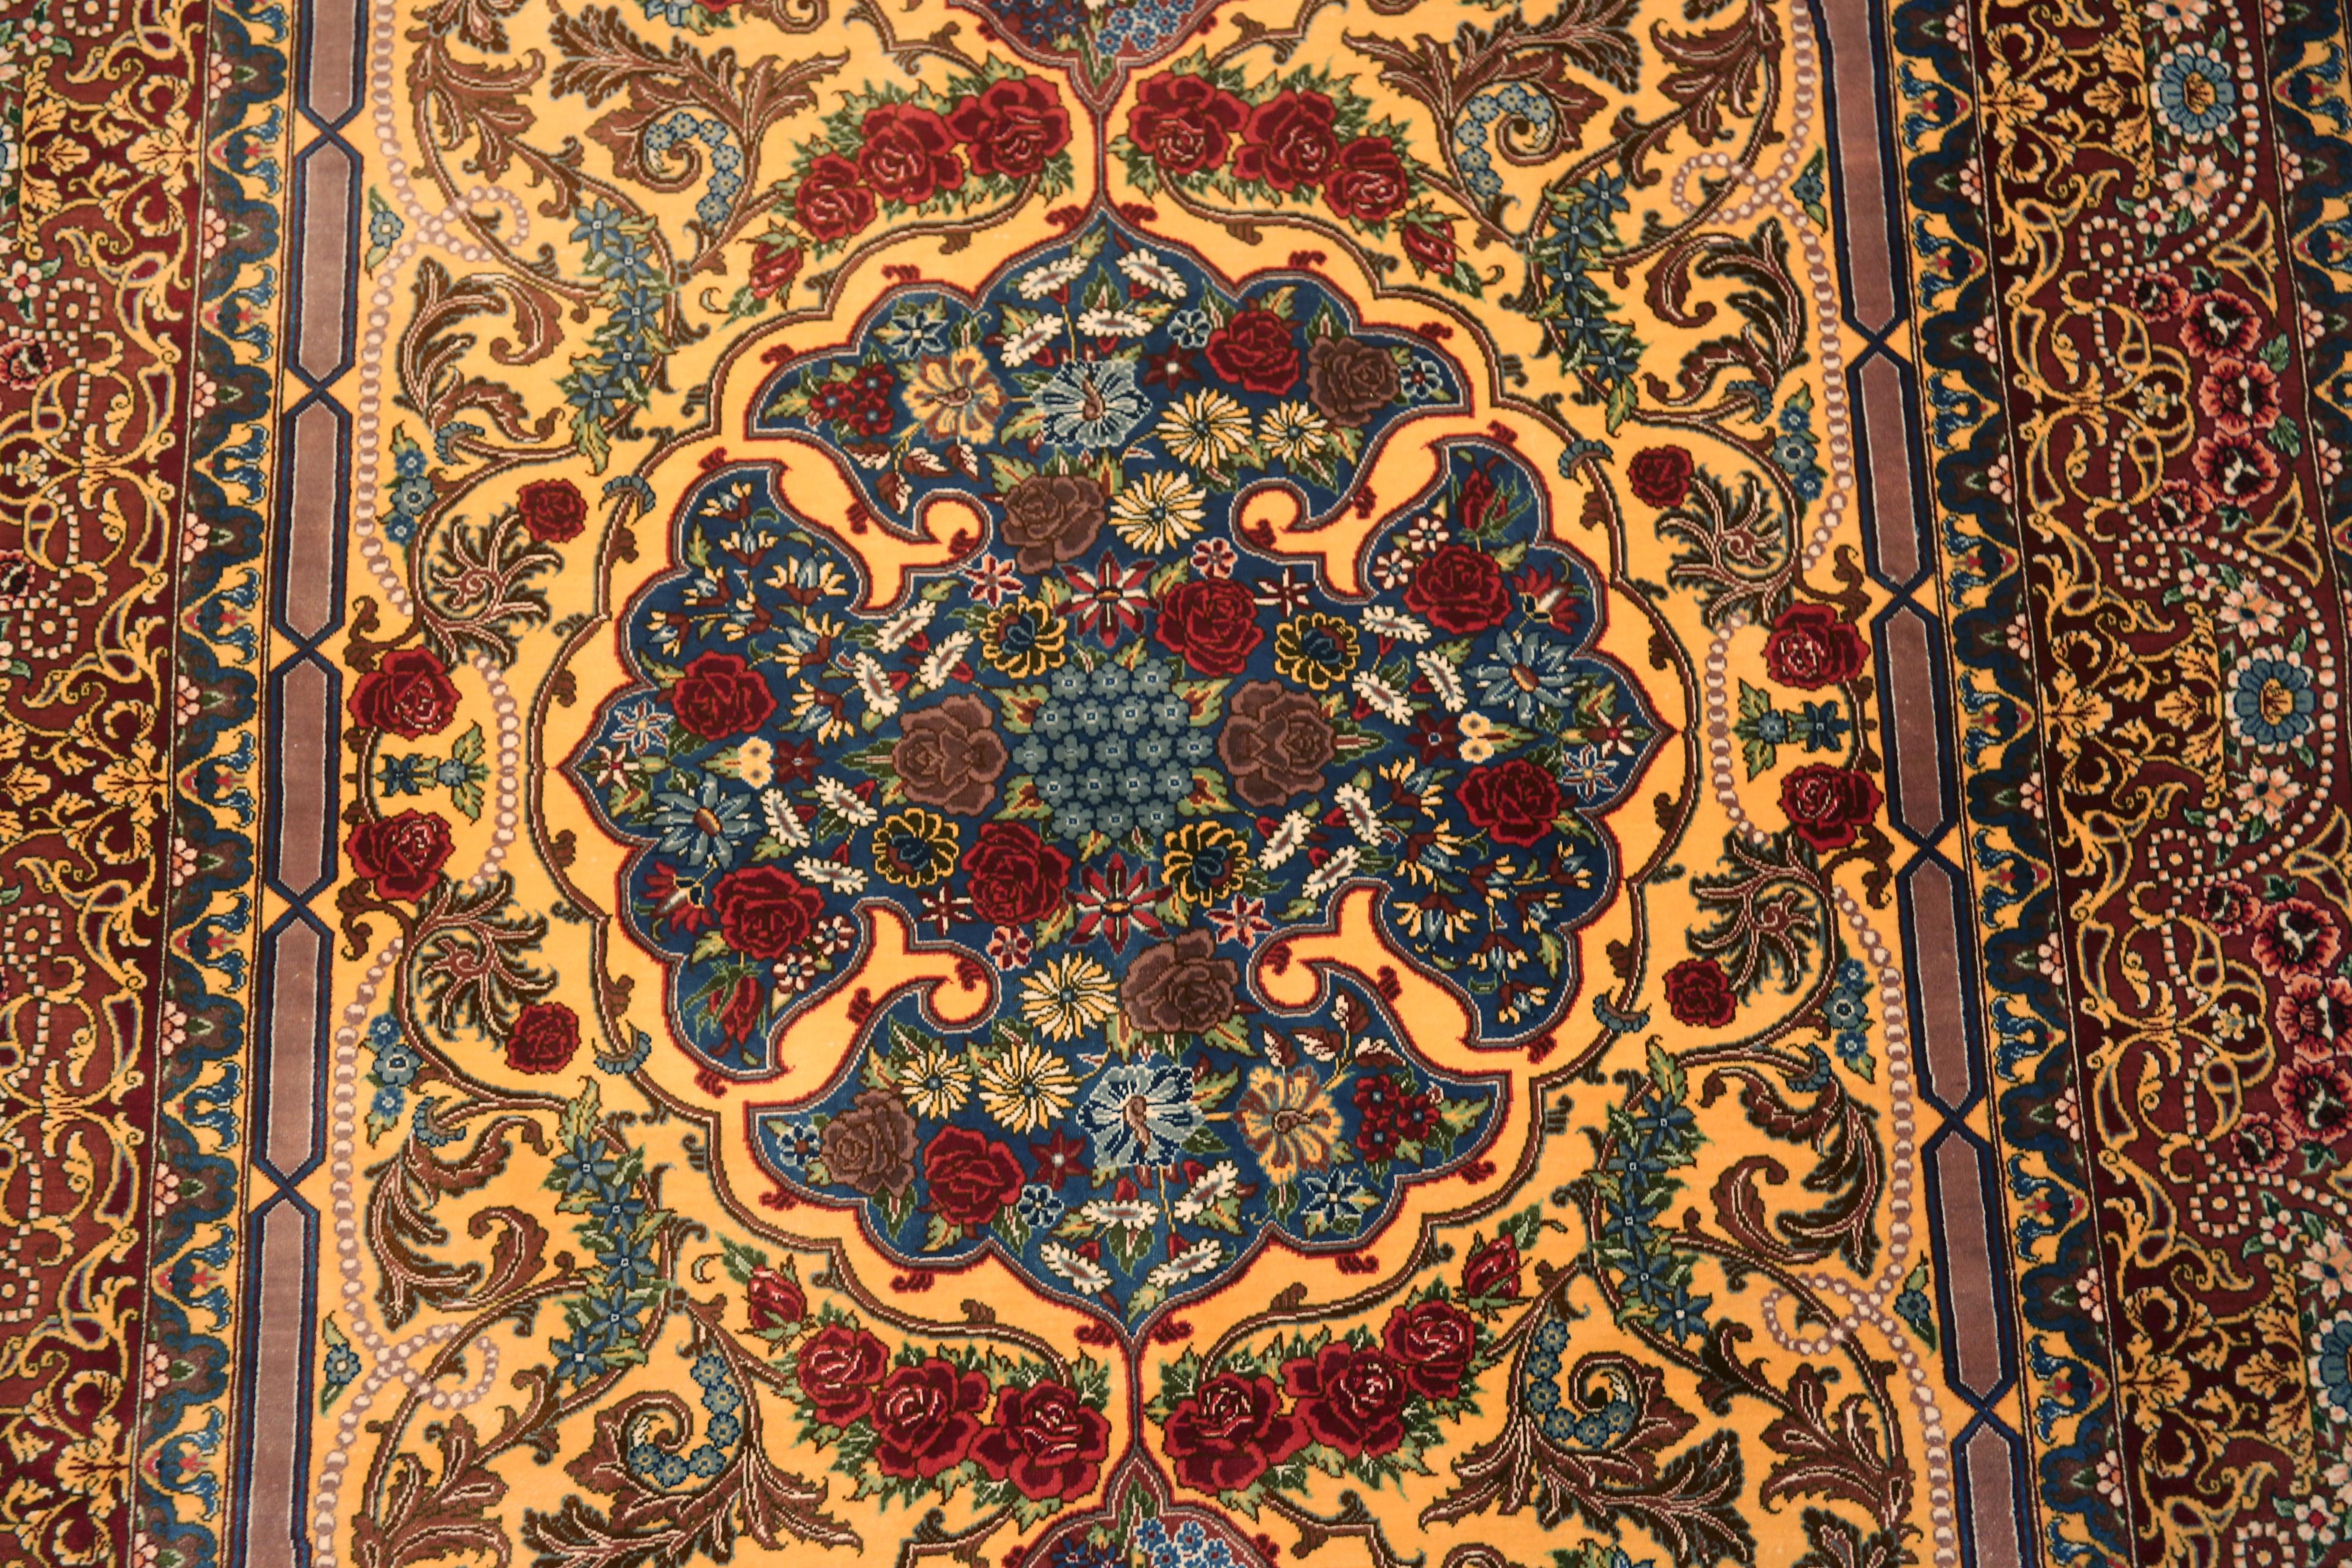 Fine Small Artistic Gold Color Luxurious Vintage Persian Silk Qum Rug 3'4